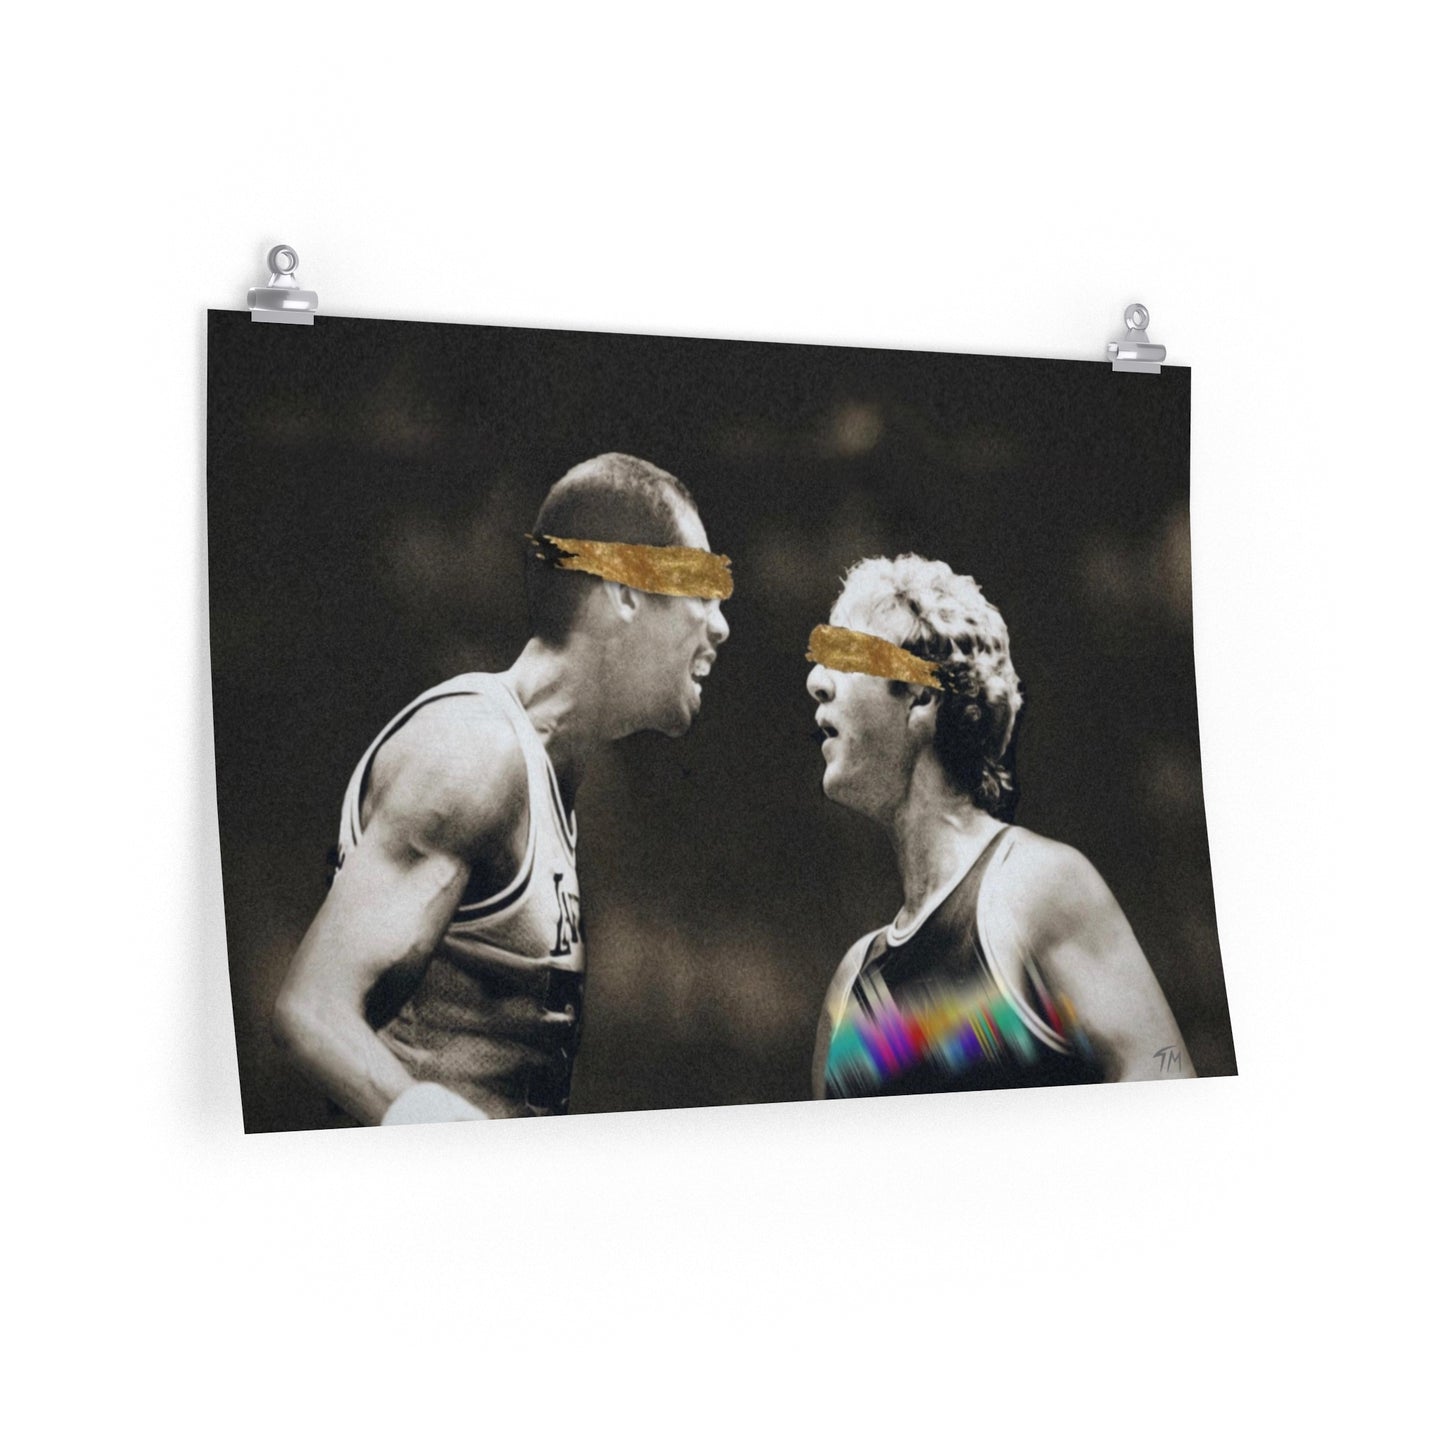 Kareem and Bird (Heart Of The Games) - Poster Print